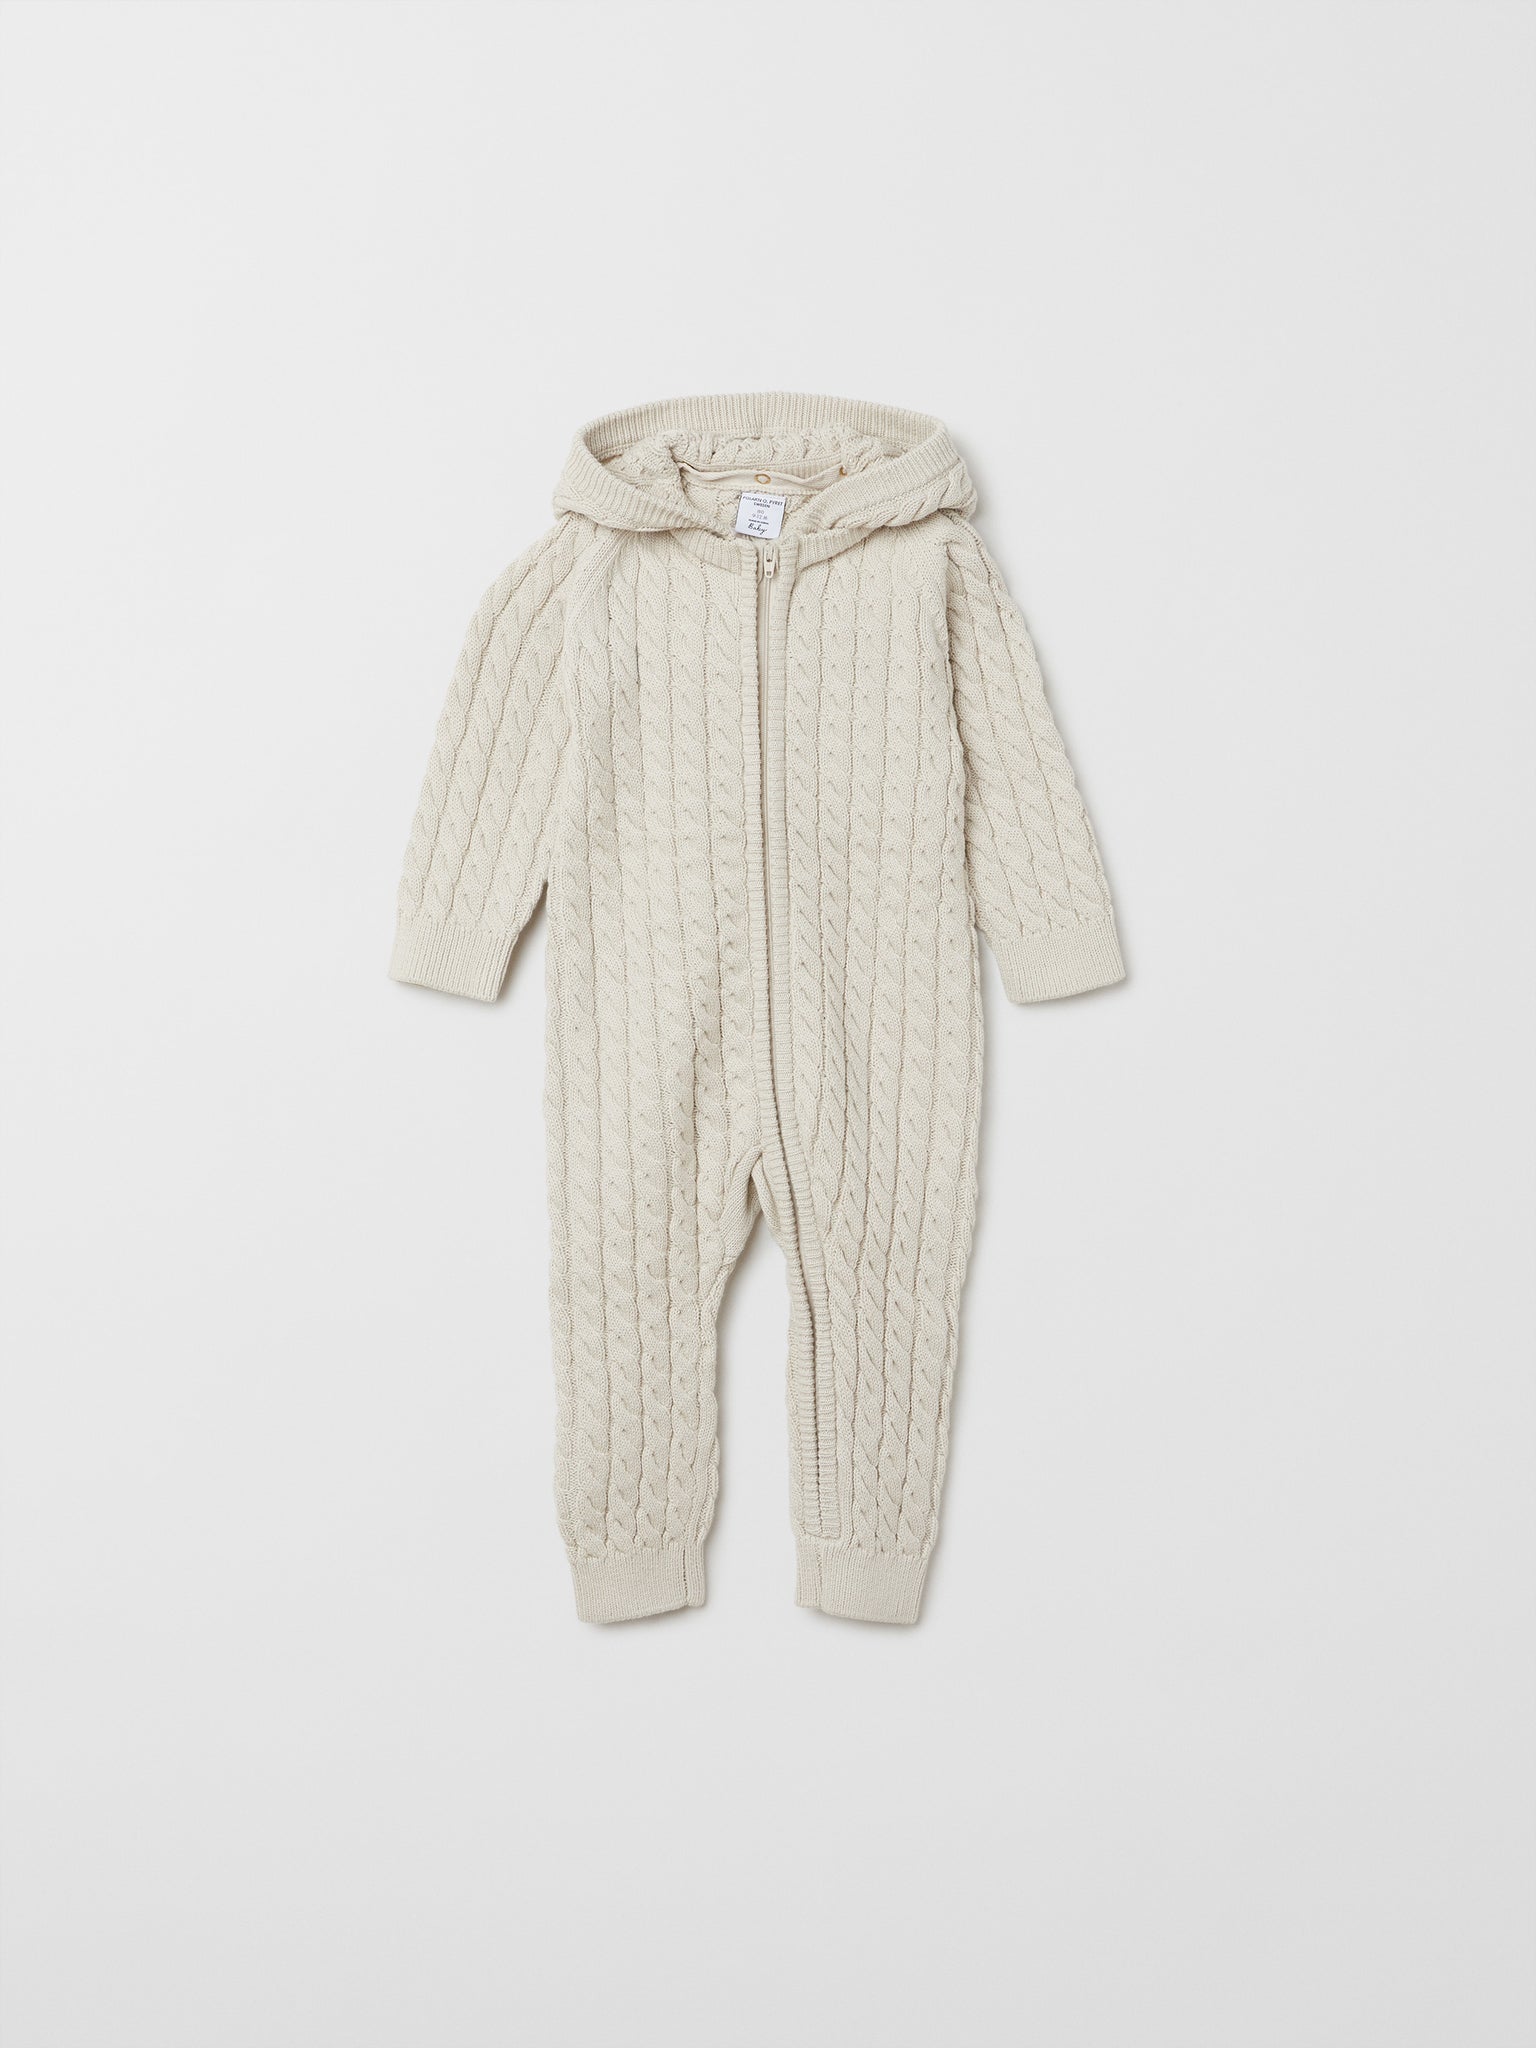 Knitted Cotton Beige Baby All-In-One from the Polarn O. Pyret baby collection. The best ethical baby clothes